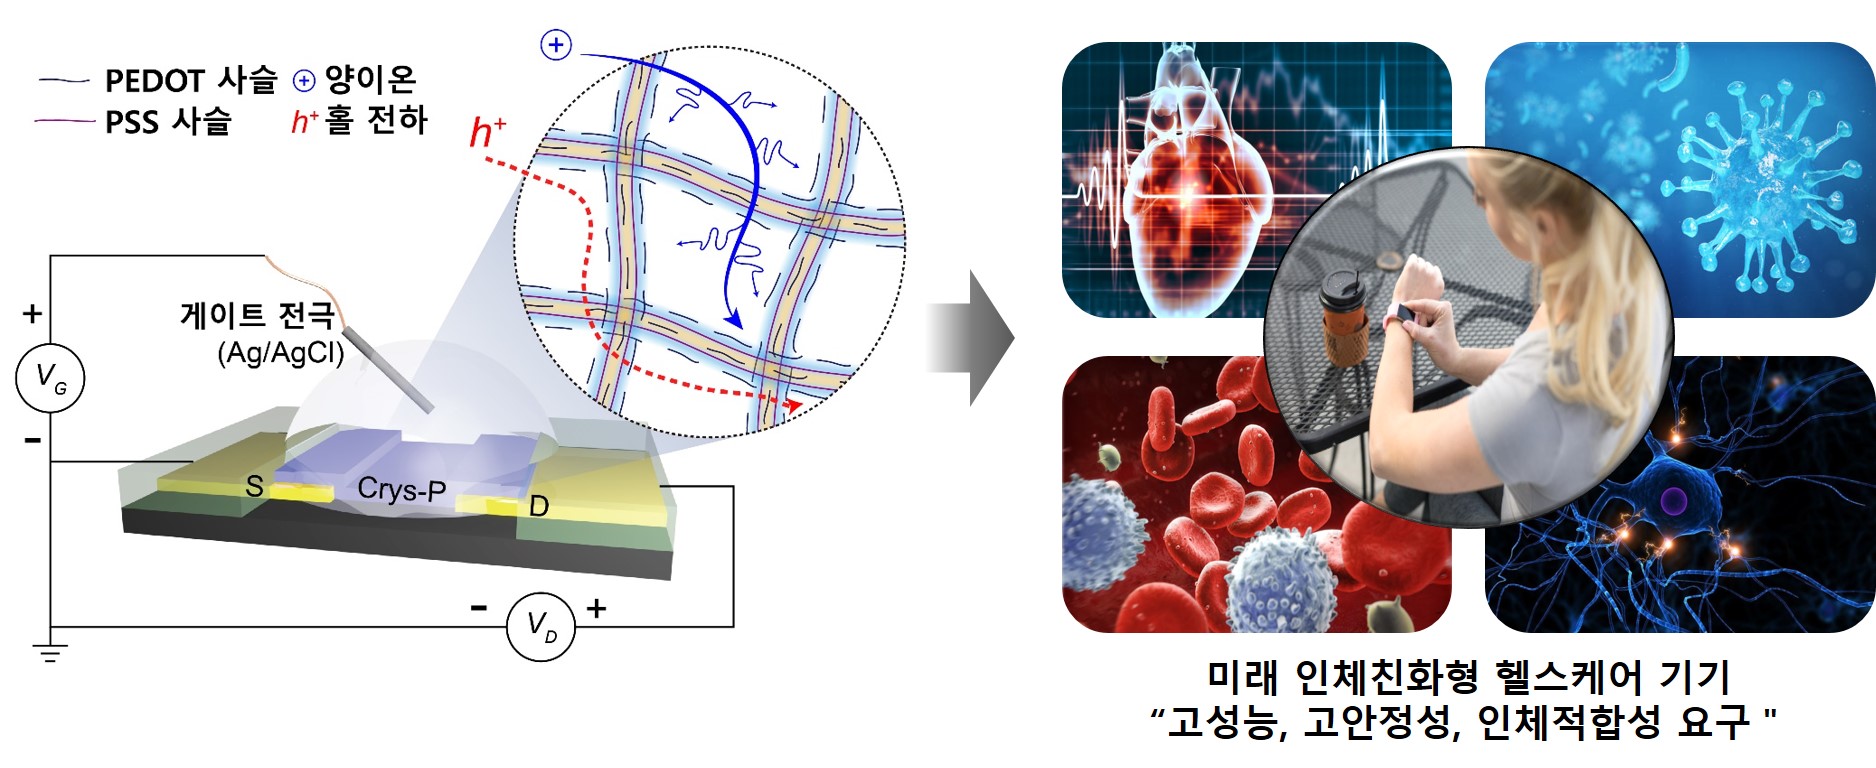 Professors Hyung-Han Yoon and Kwanghee Lee have developed electronic devices for human transplants (National Research Foundation of Korea) 이미지